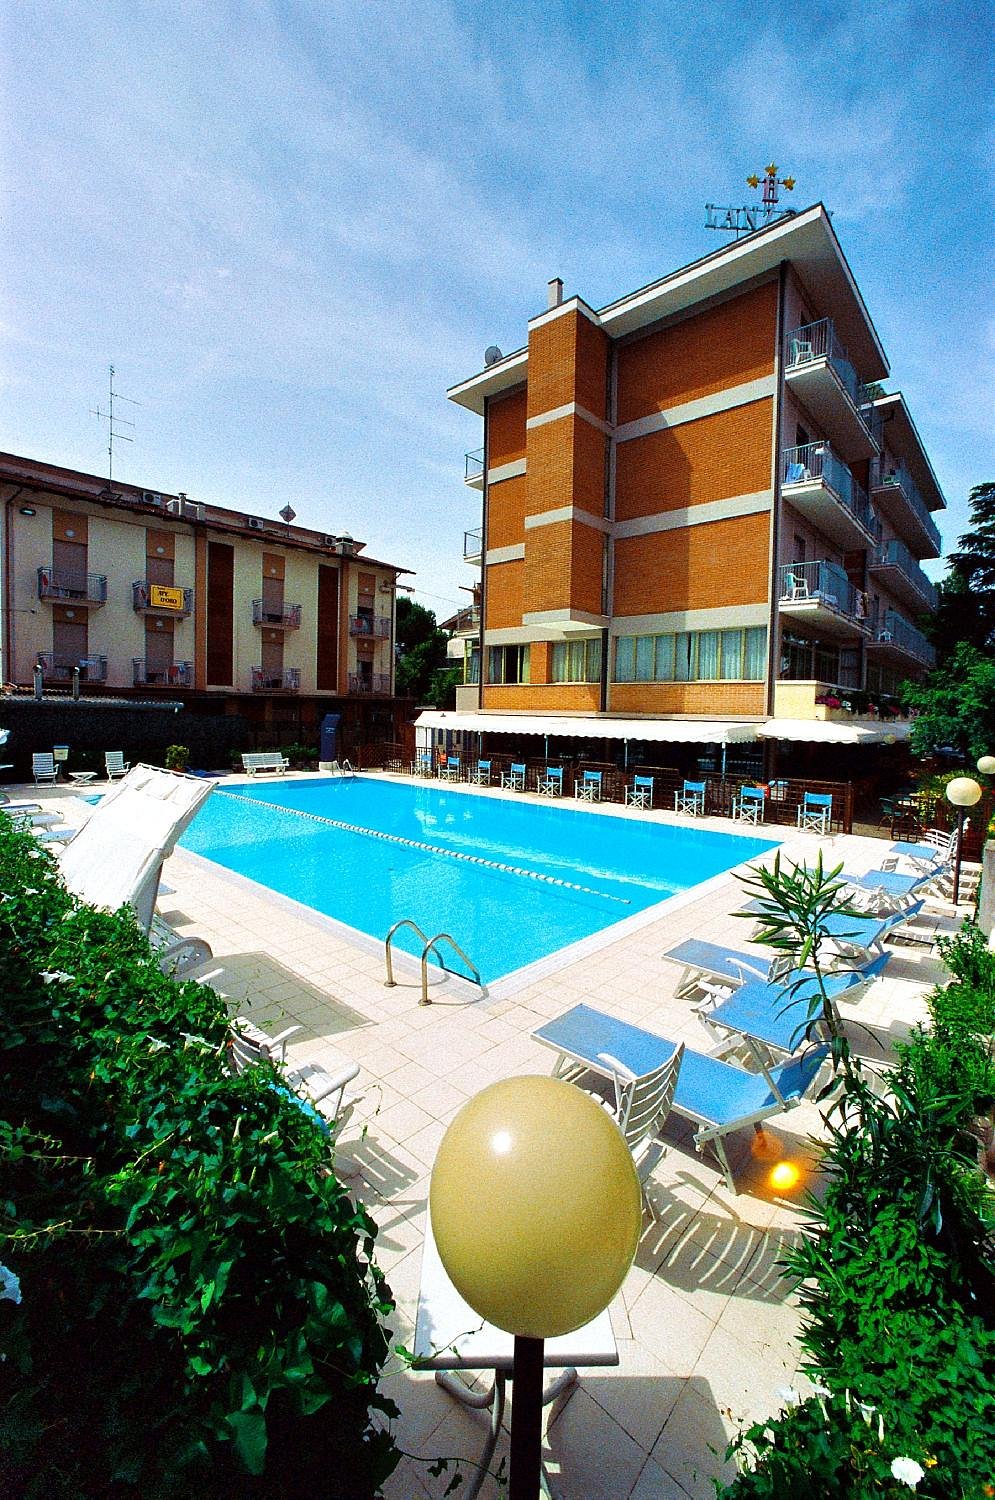 HOTEL LANZONI - Prices & Reviews (Cervia, Italy)